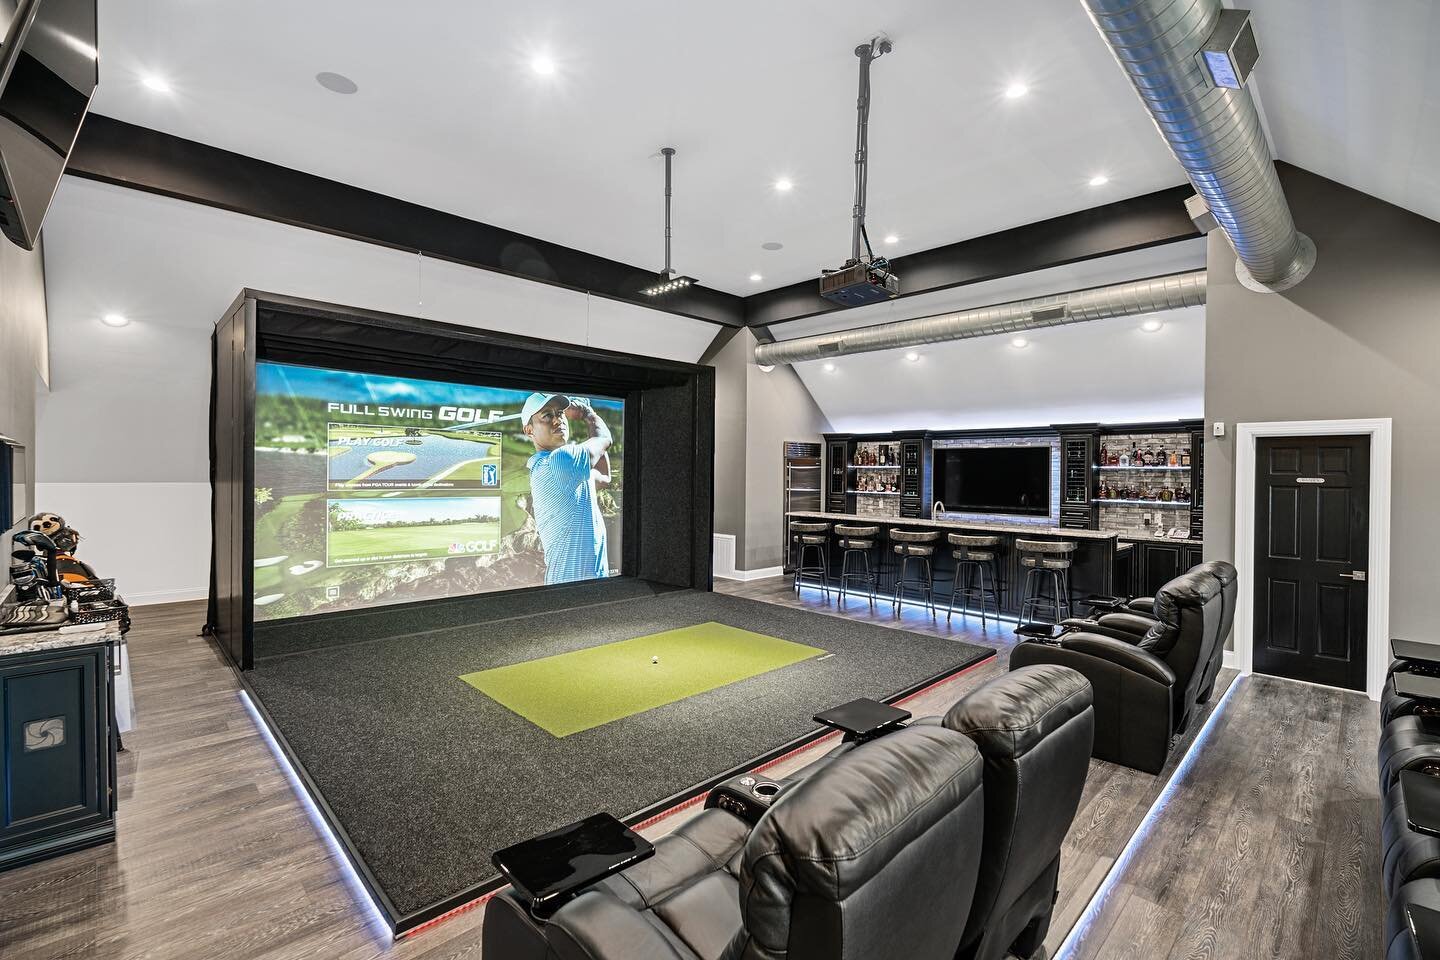 ATTIC OR BASEMENT⁉️ Which has the best features in this property? The ATTIC w/ golf simulator bar or BASEMENT w/dance floor bar ⁉️ You pick👇

#attic #atticmancave #golfsimulators #basementremodel #danceclubforhomos #realestate #realestatemarketing #